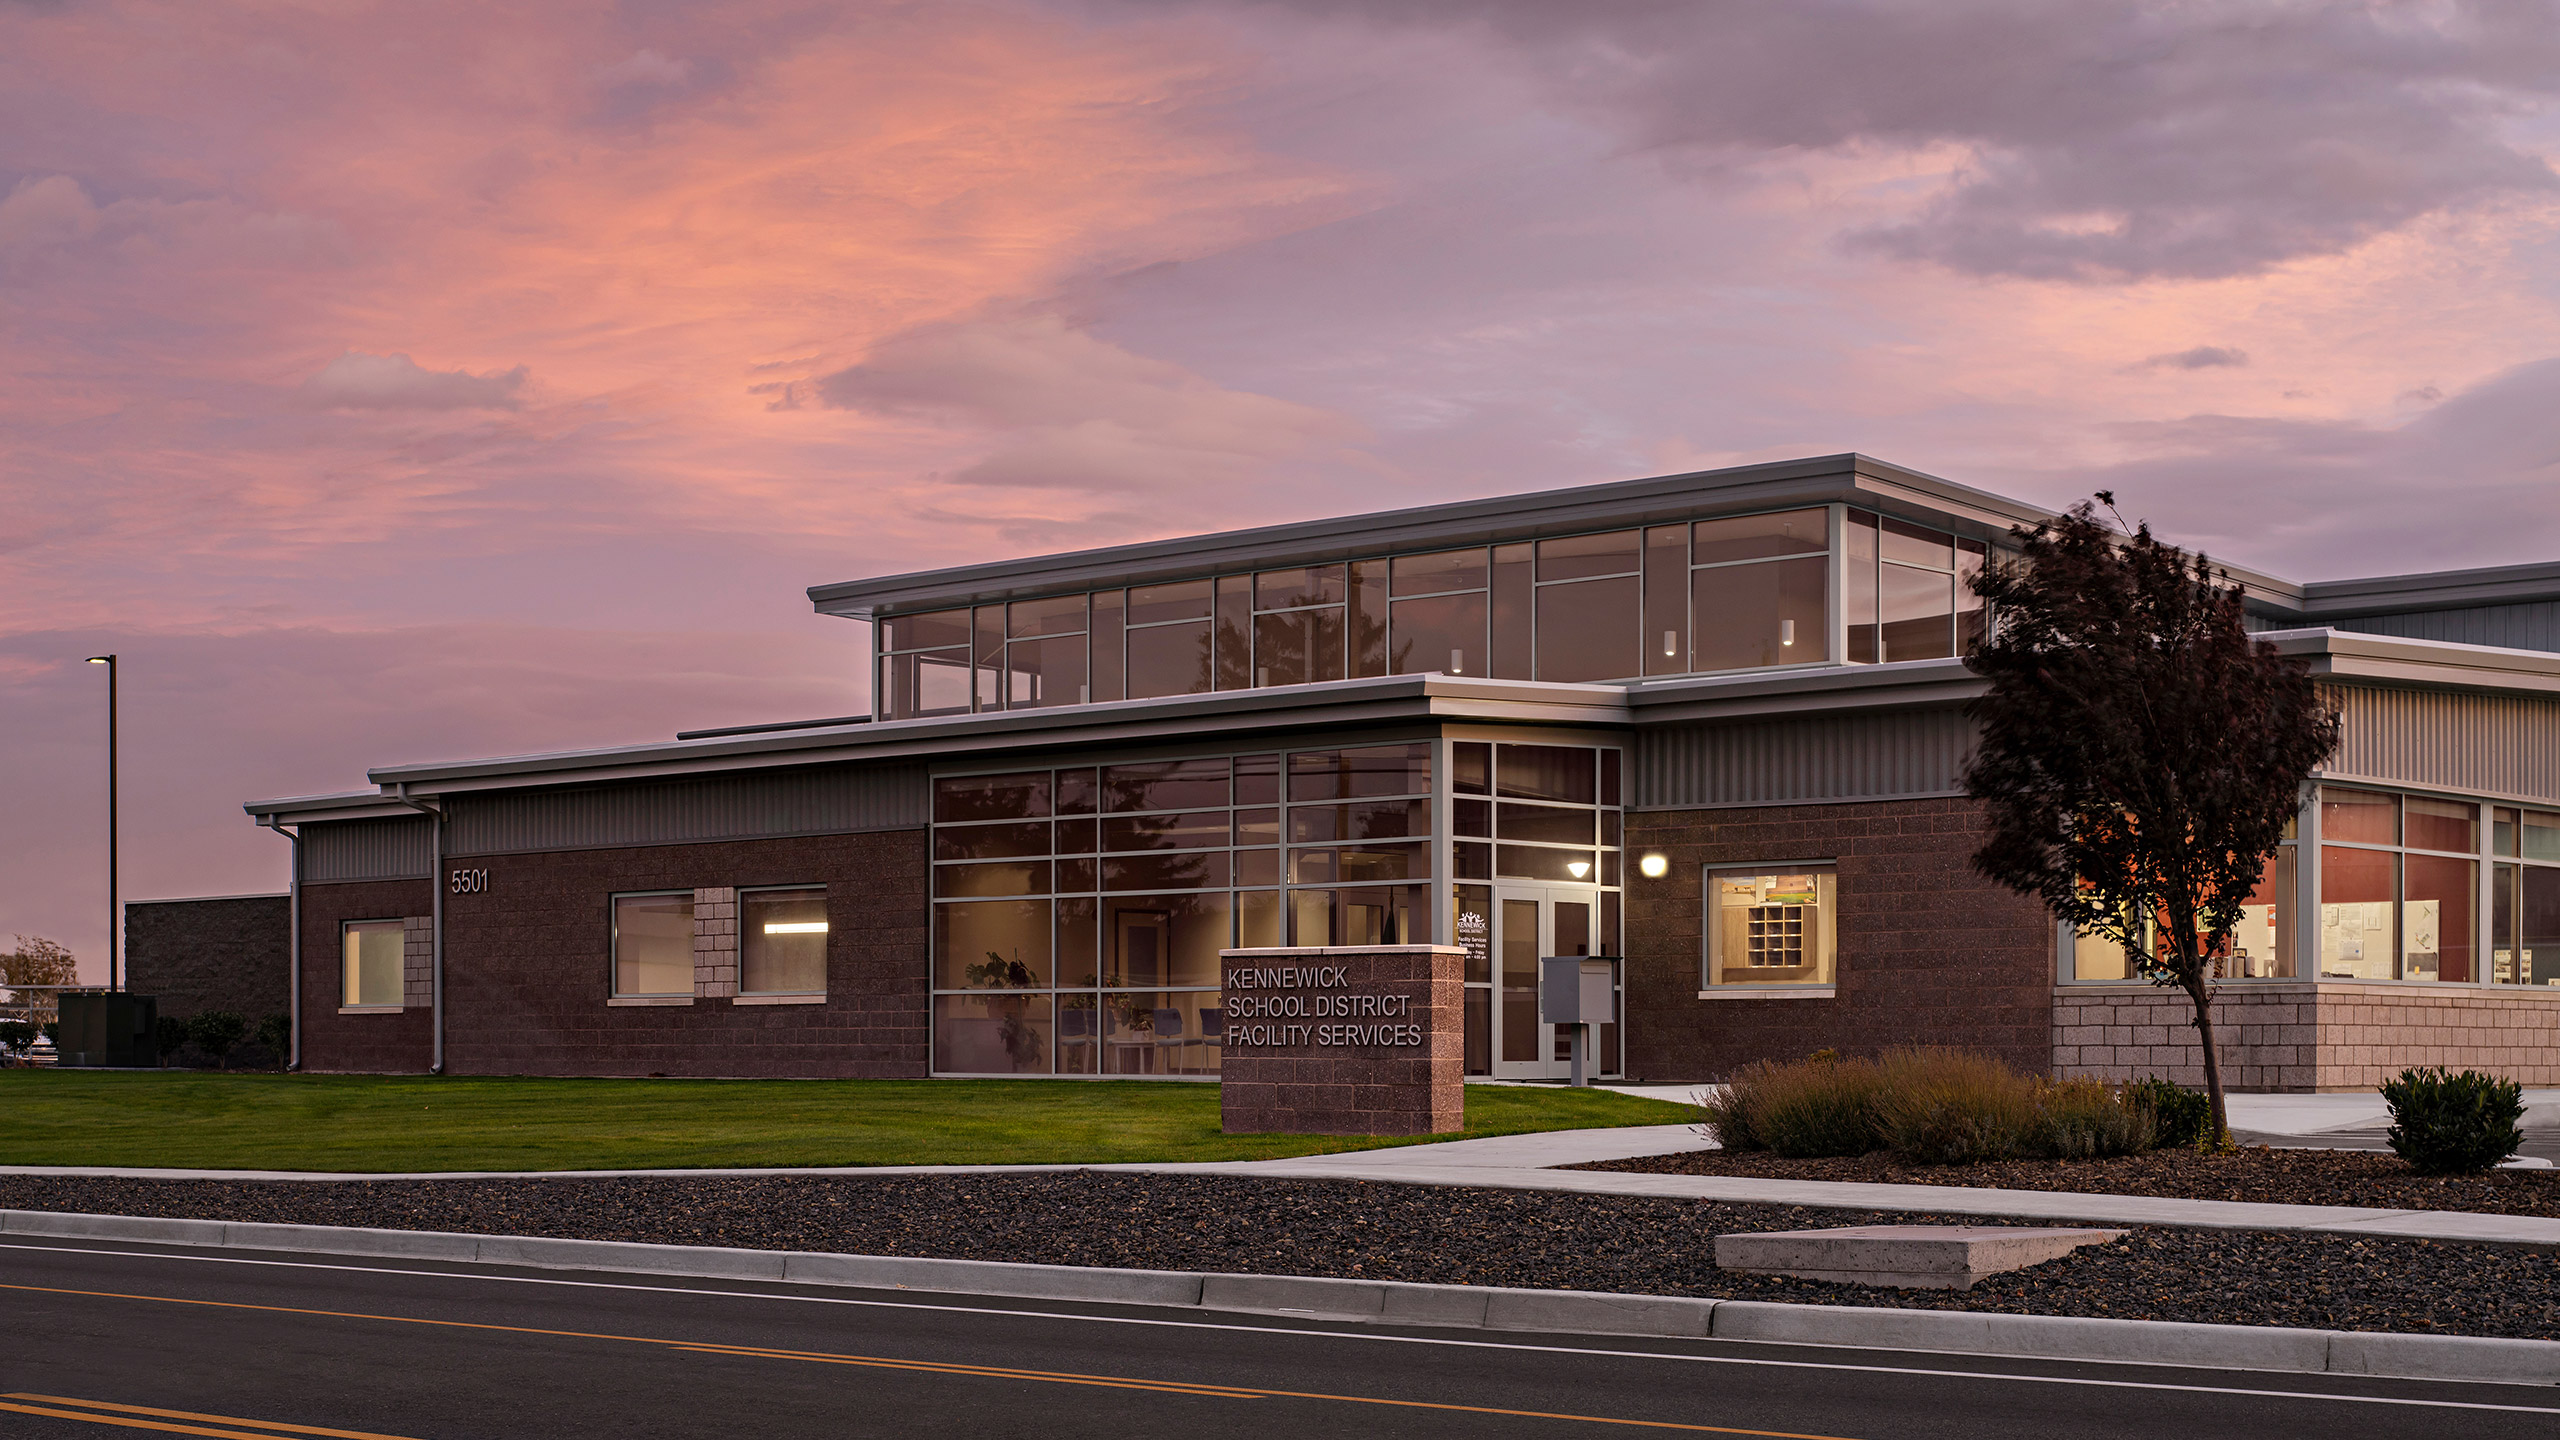 Kennewick School District Facility Services Building » ALSC Architects